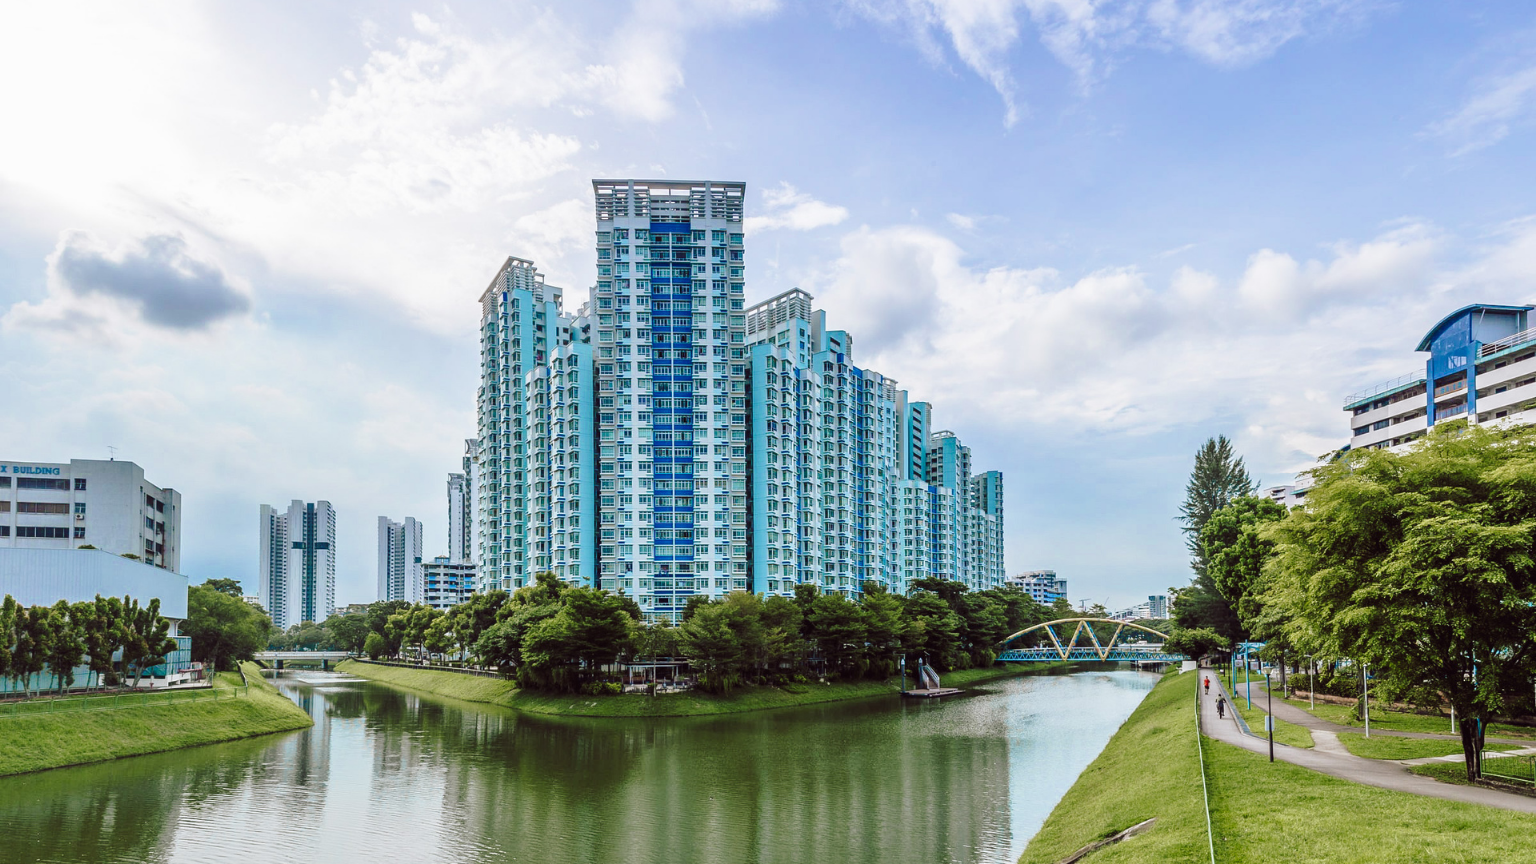 HDBeautiful-4-HDB-Flats-With-A-View-Cover